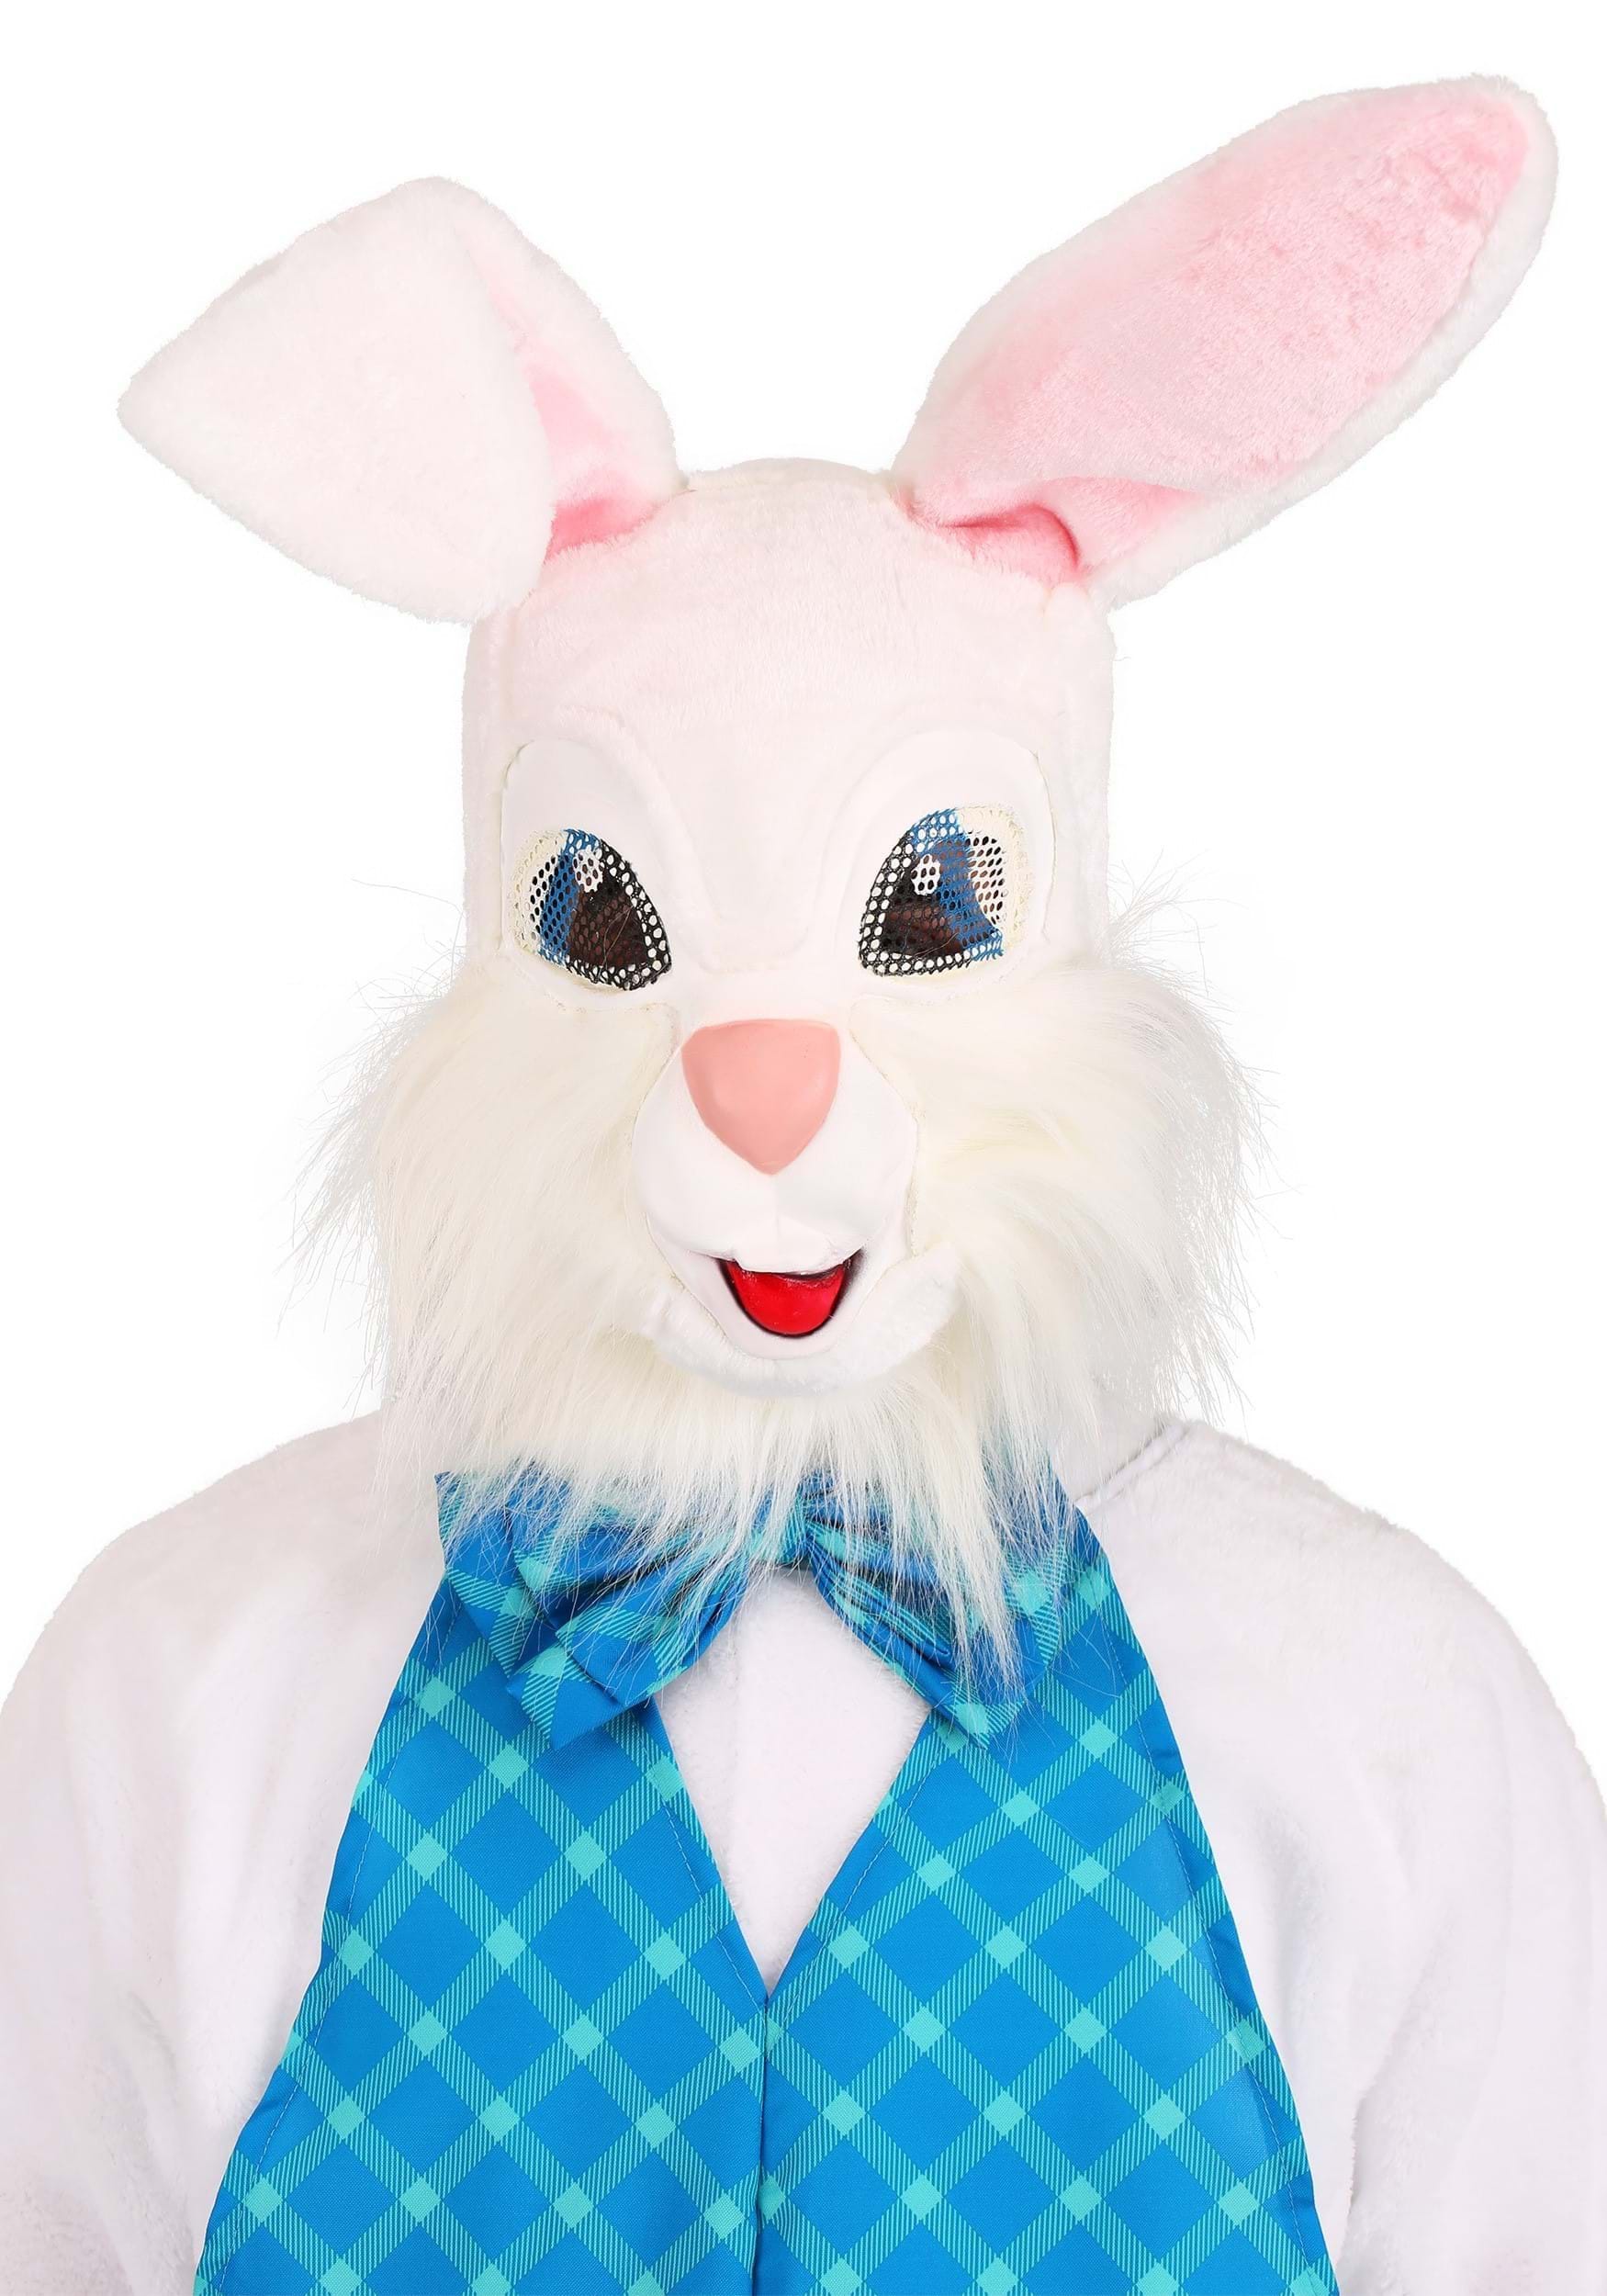 Adult Plus Size Mascot Easter Bunny Fancy Dress Costume , Exclusive Easter Fancy Dress Costumes